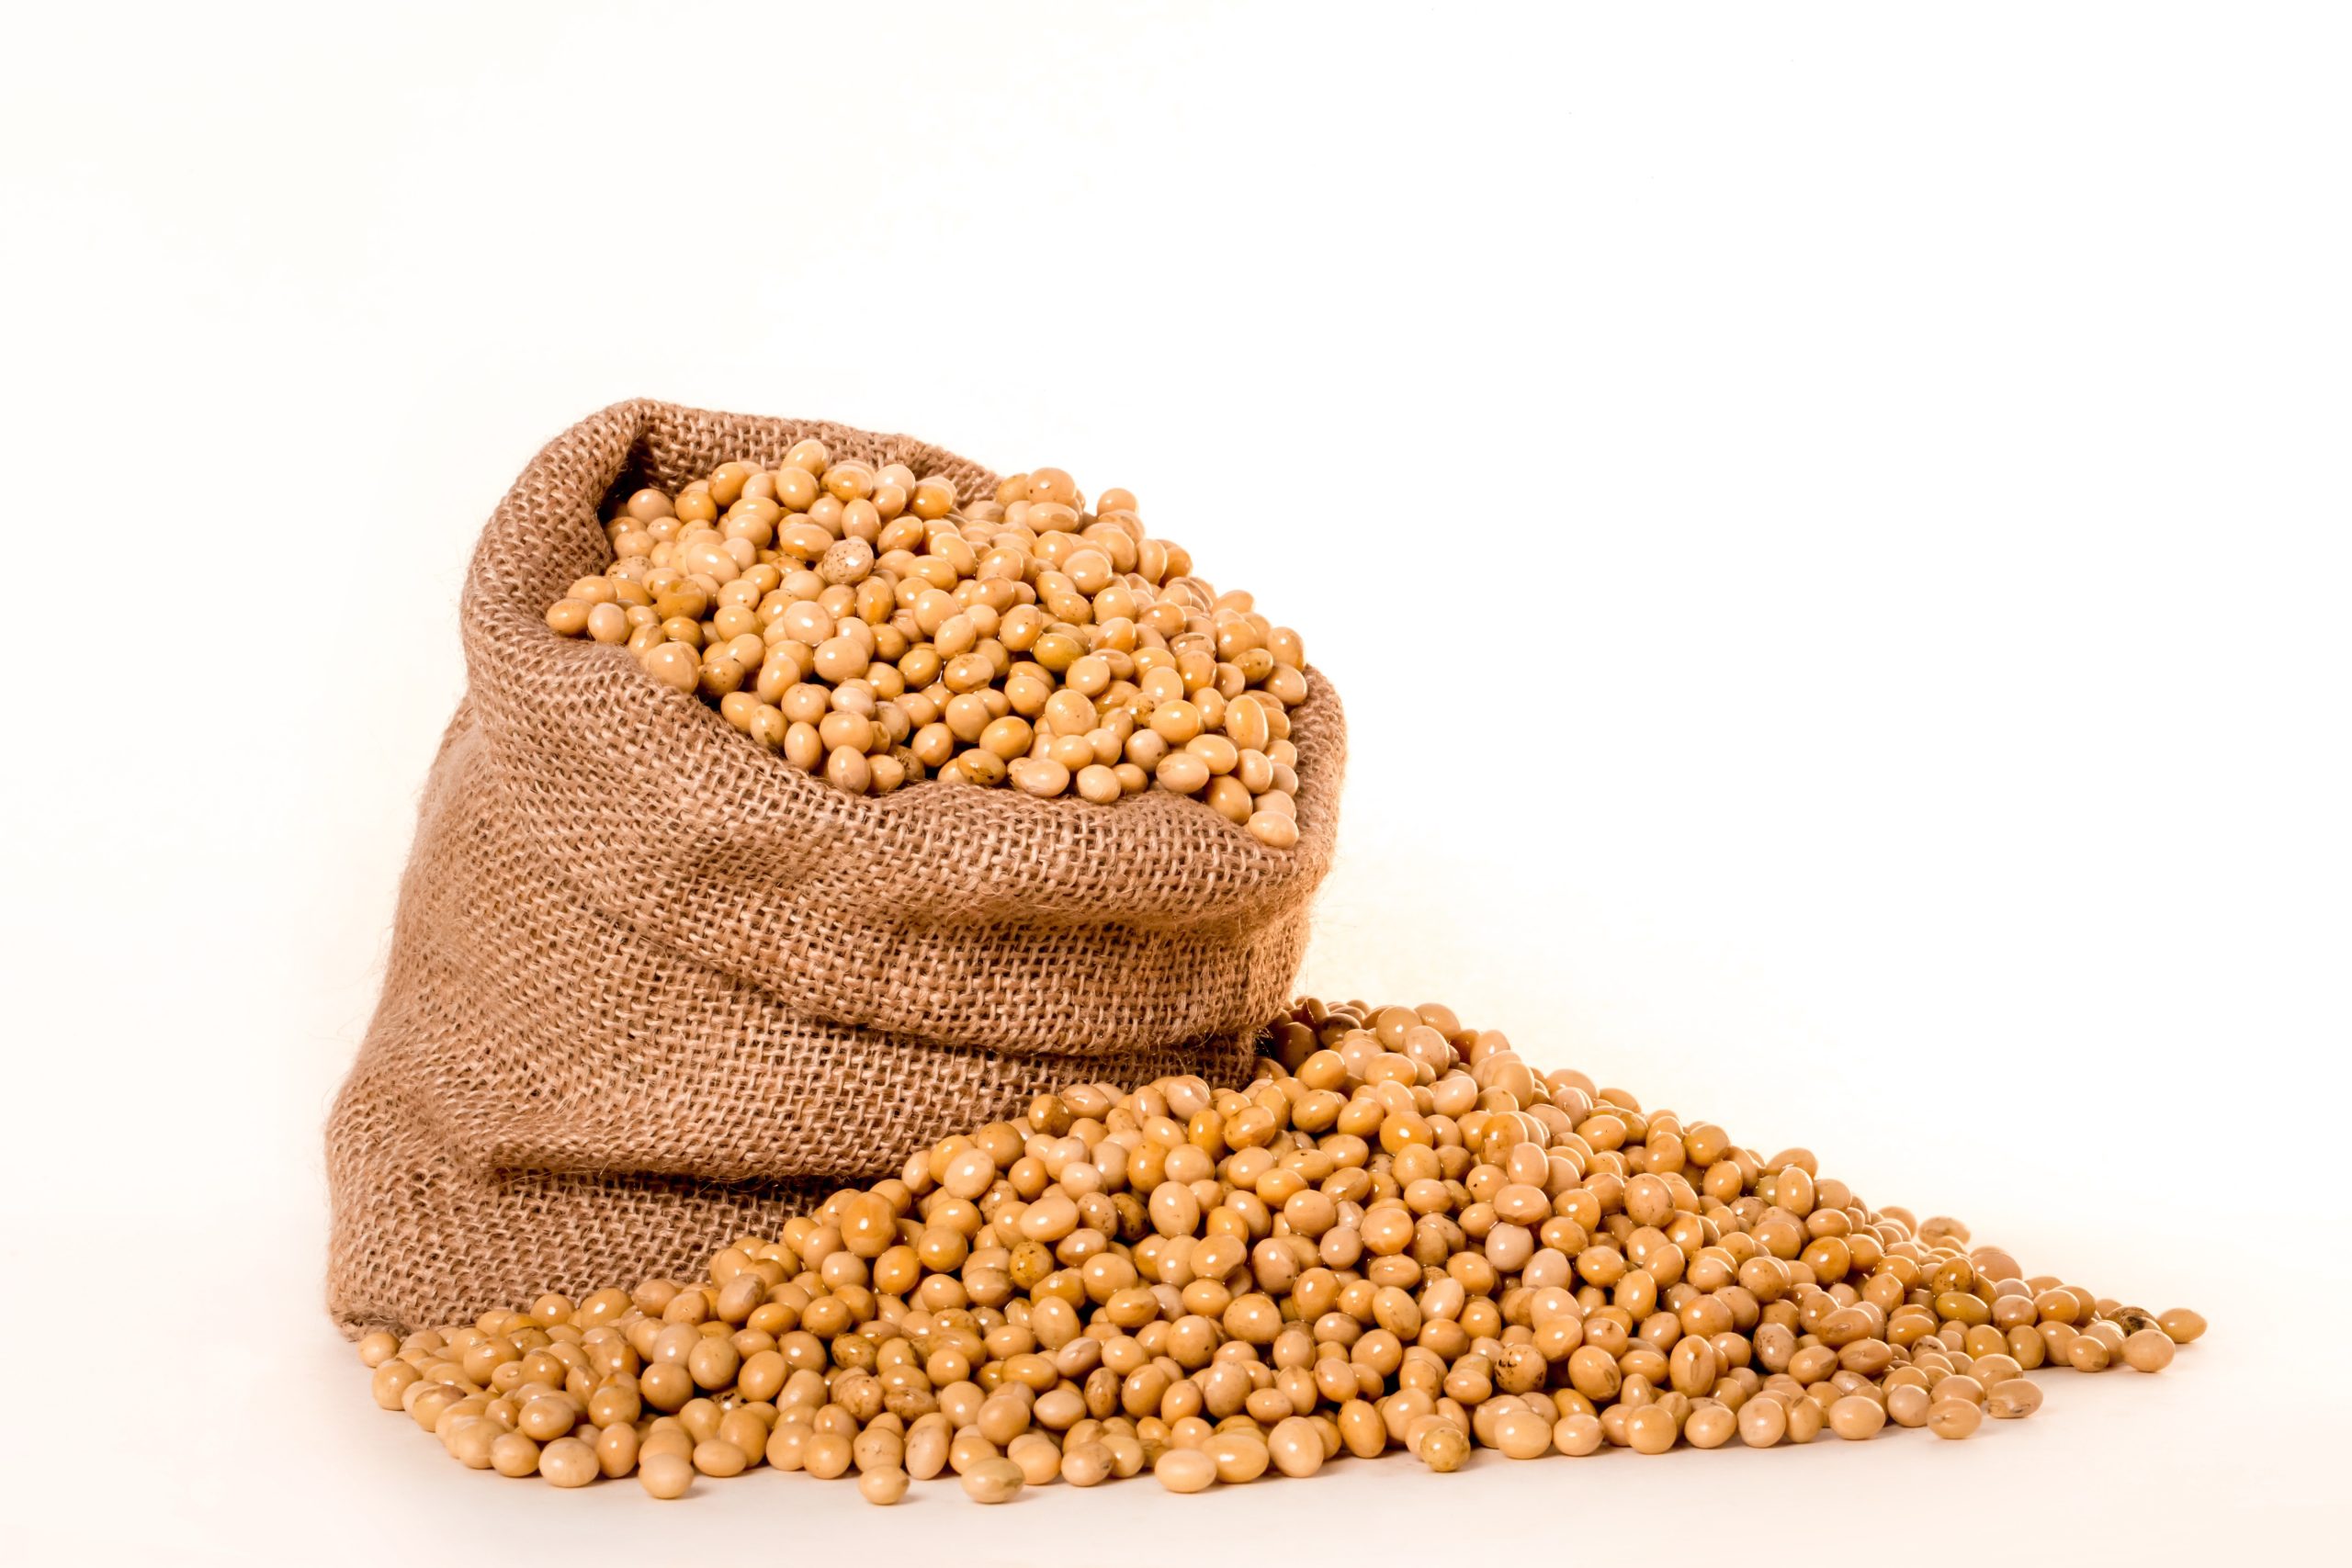 In the above photo, soybeans are shown in a bag and overflowing with credit to pnmralex at Pixabay.